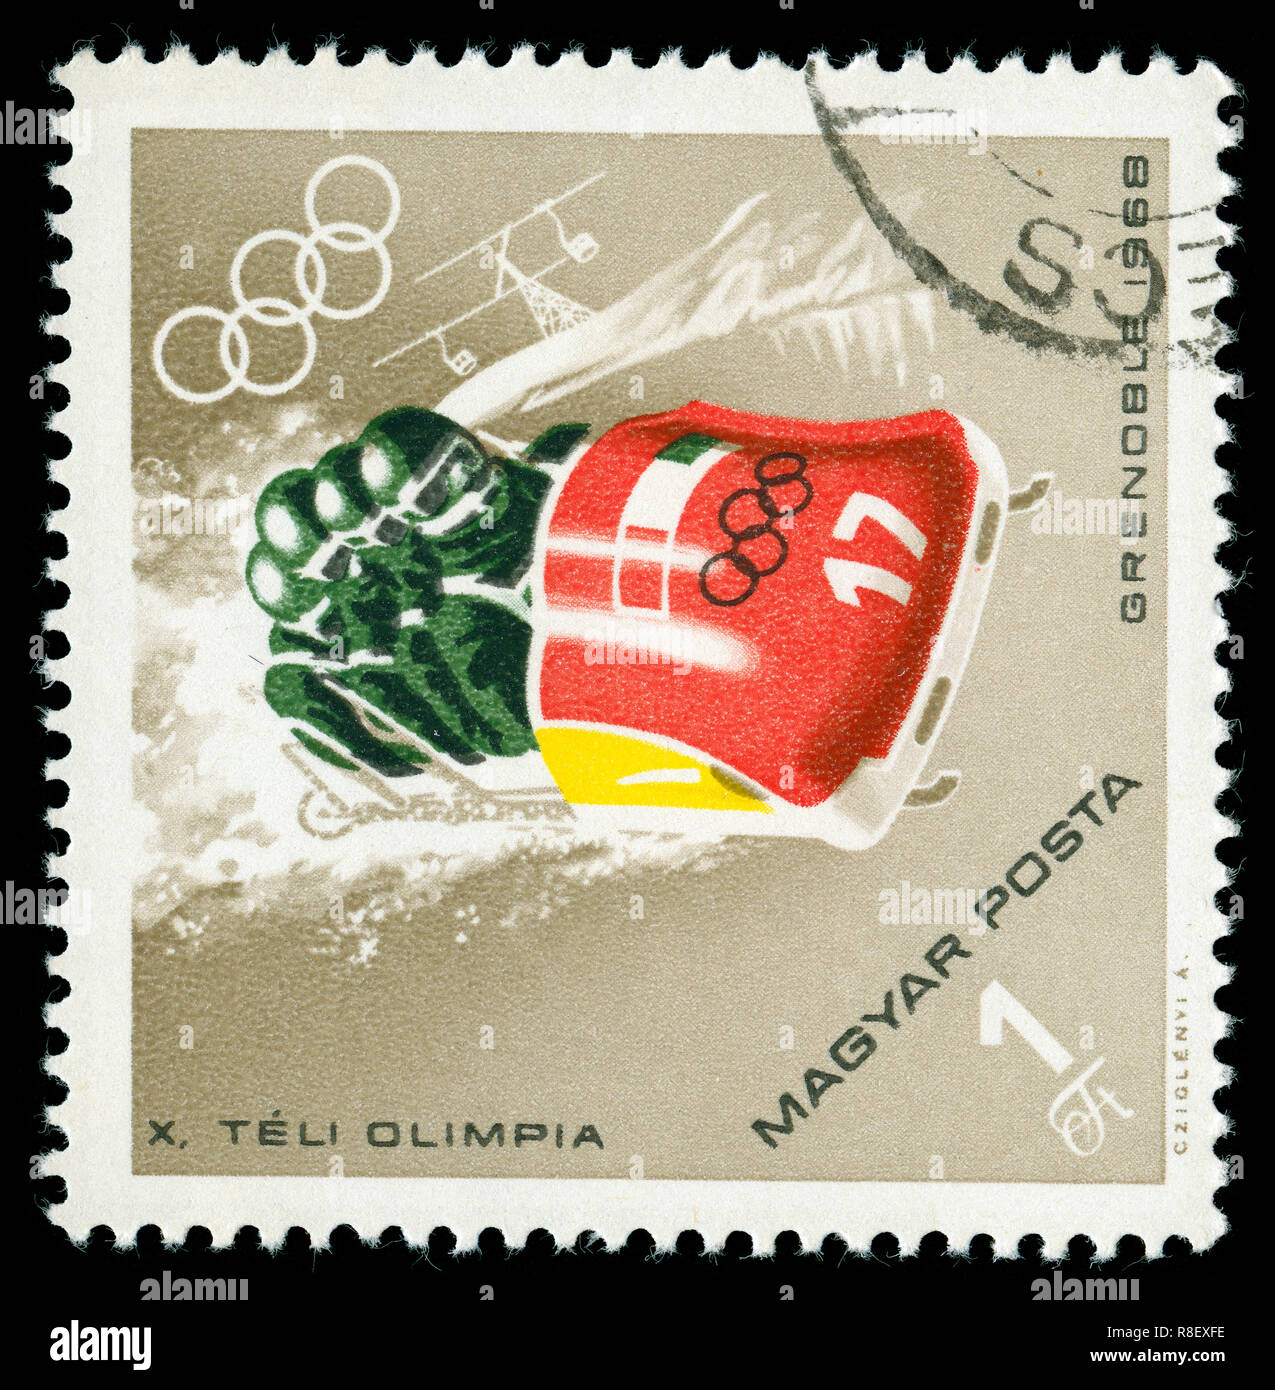 Postage stamp from Hungary in the Winter Olympics 1968, Grenoble series issued in 1968 Stock Photo